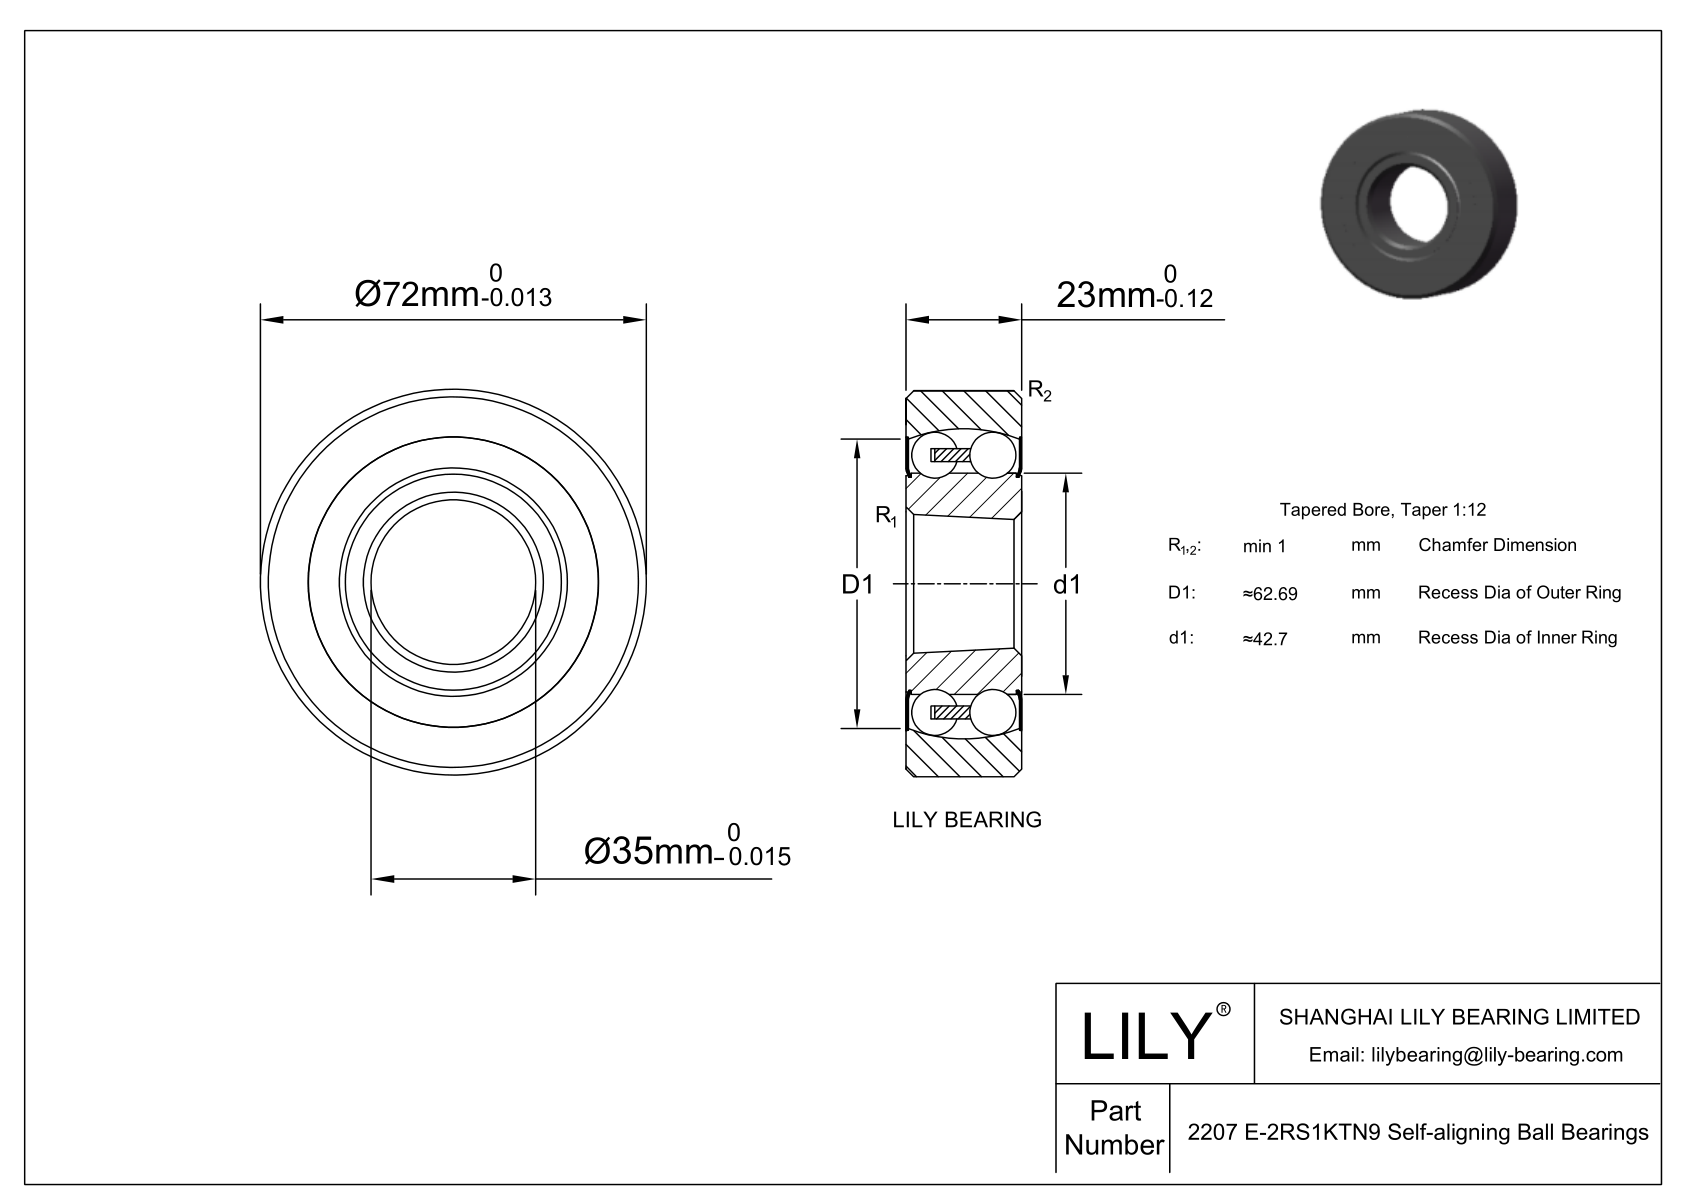 CE2207 E-SIPP Silicon Nitride Self Aligning Ball Bearings cad drawing